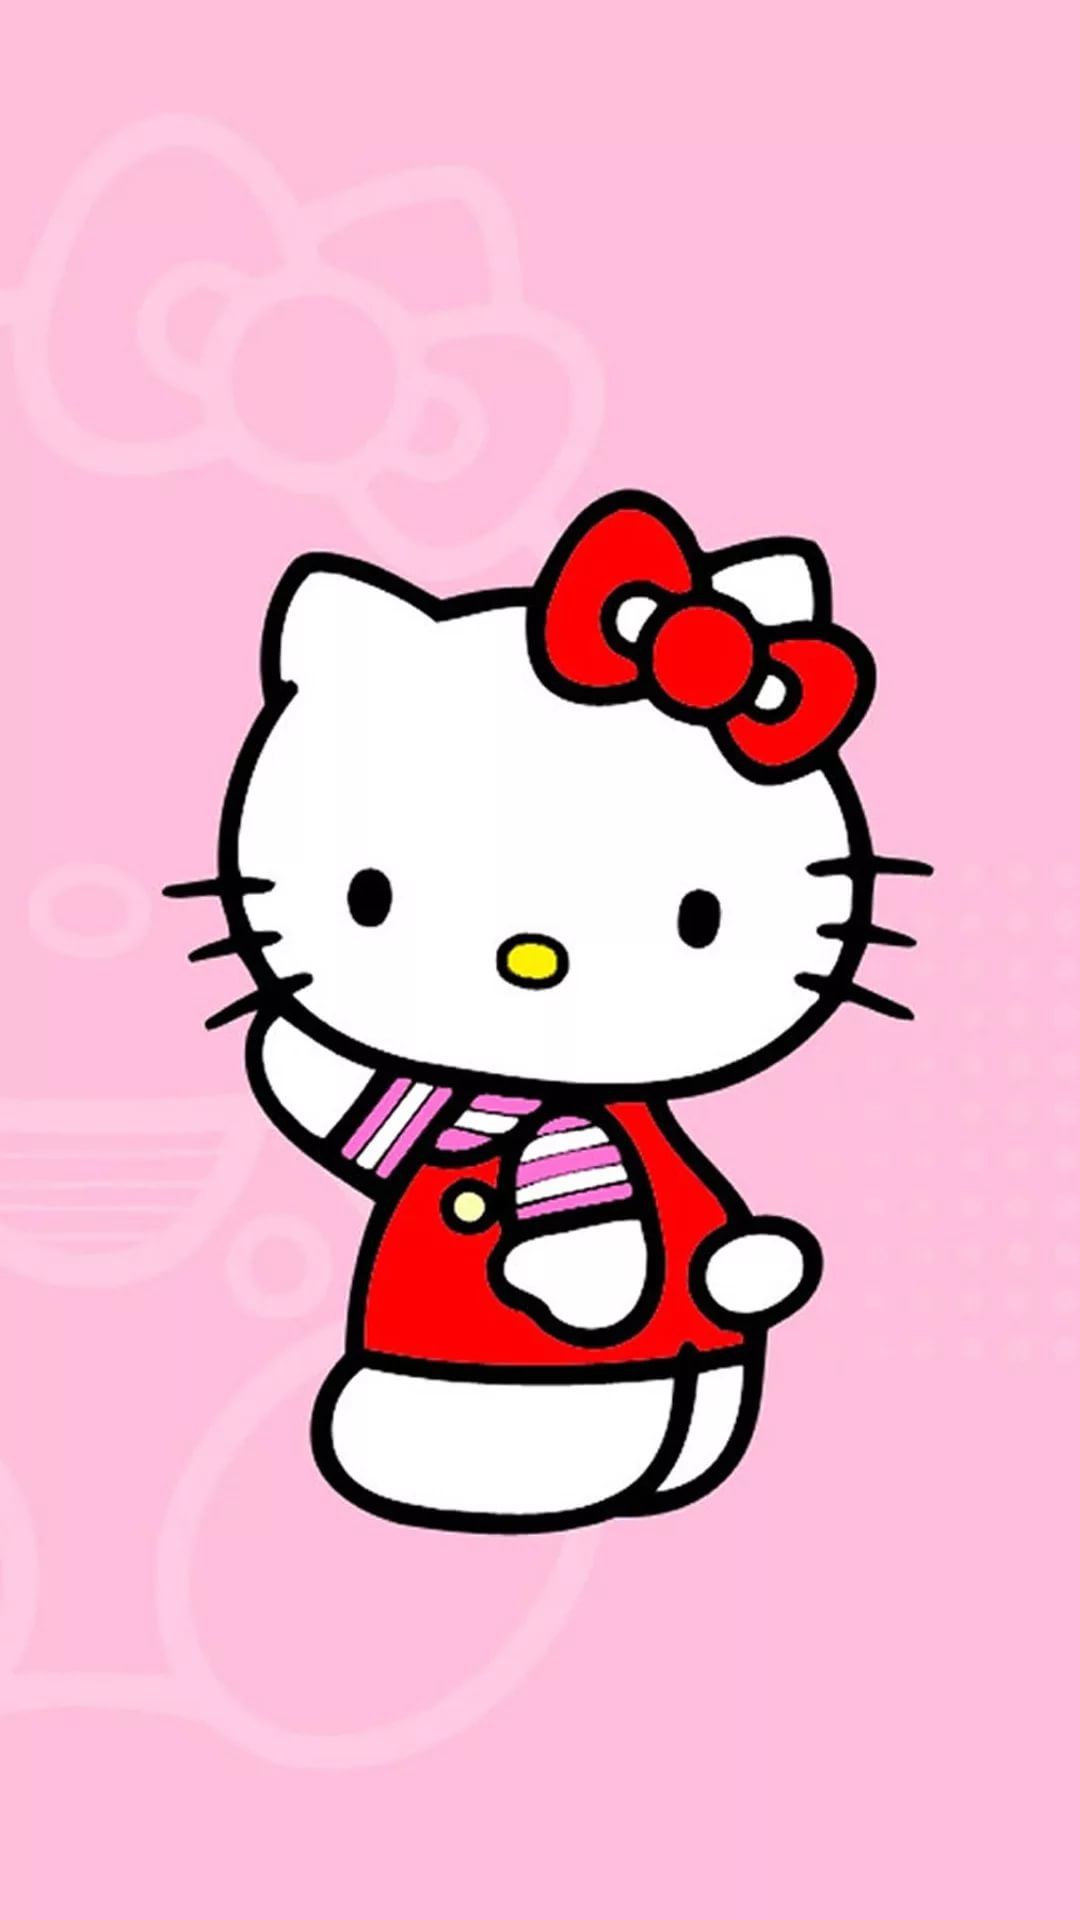 Cute Hello Kitty Cell Phone background